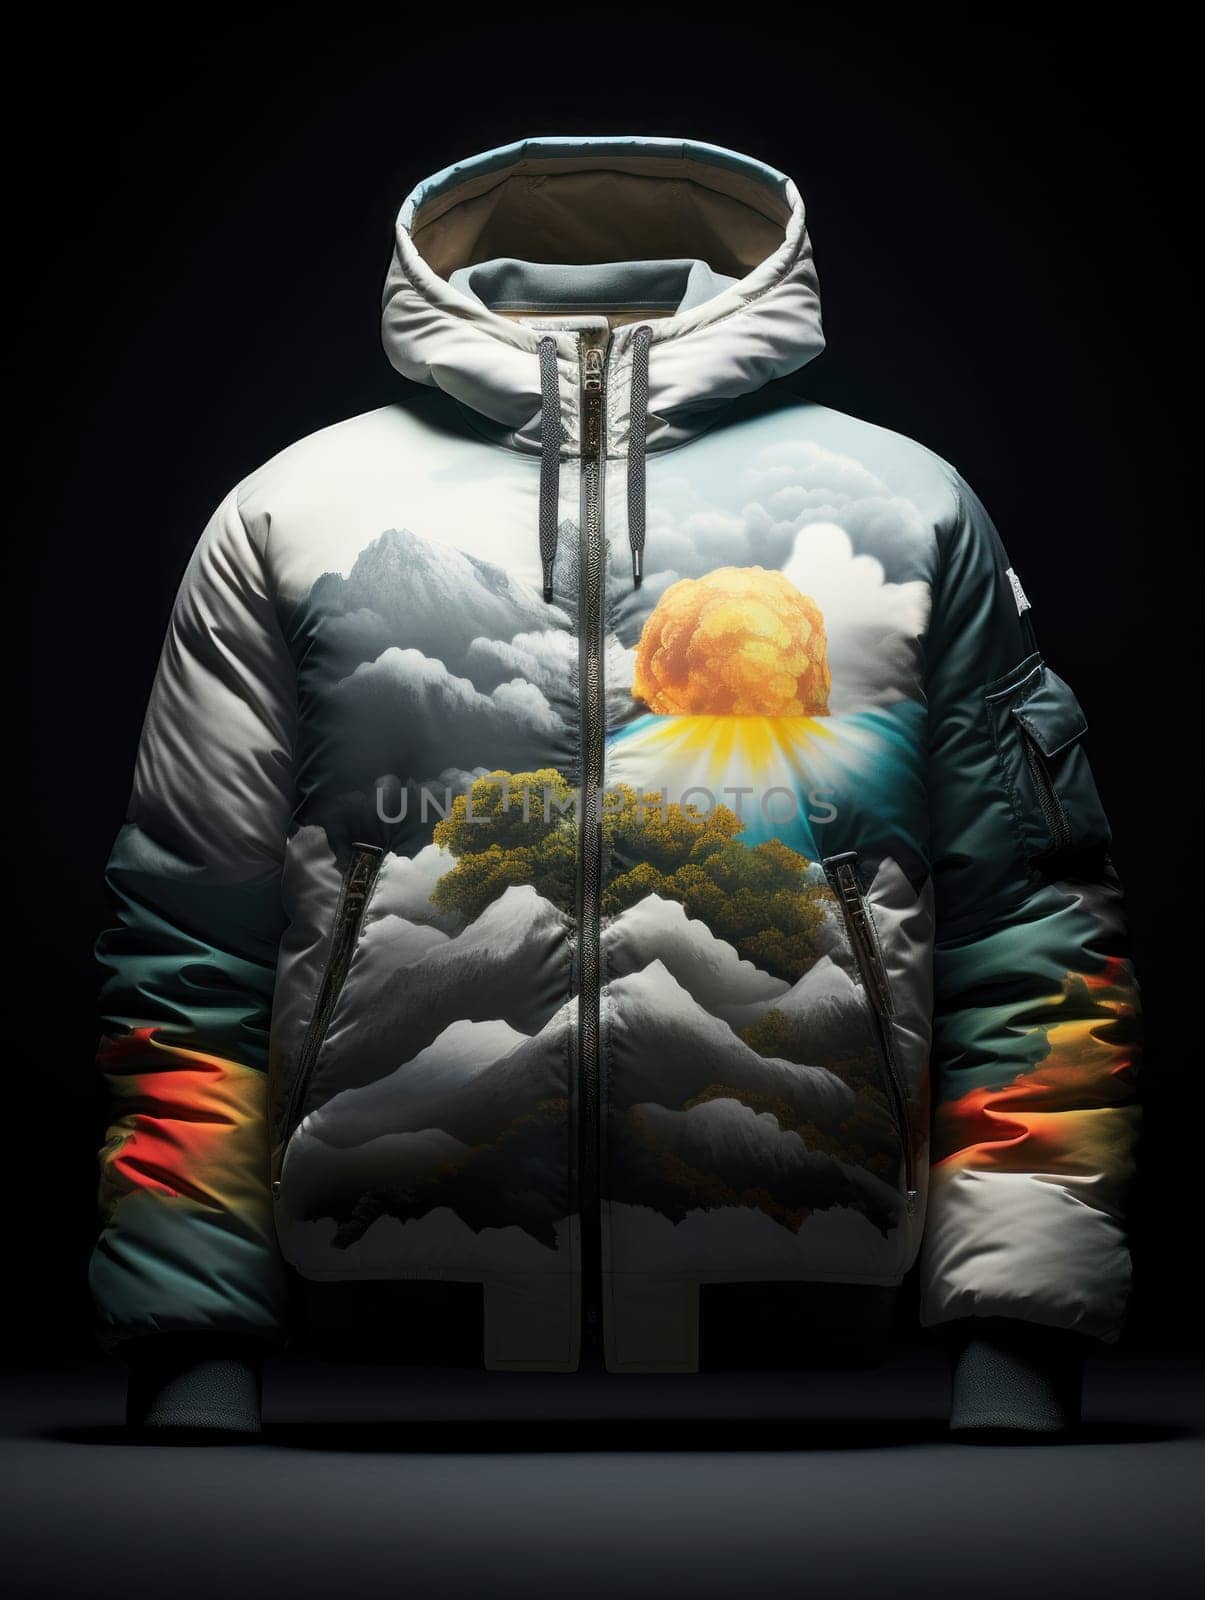 A jacket with a colorful sky and clouds on it, AI by starush